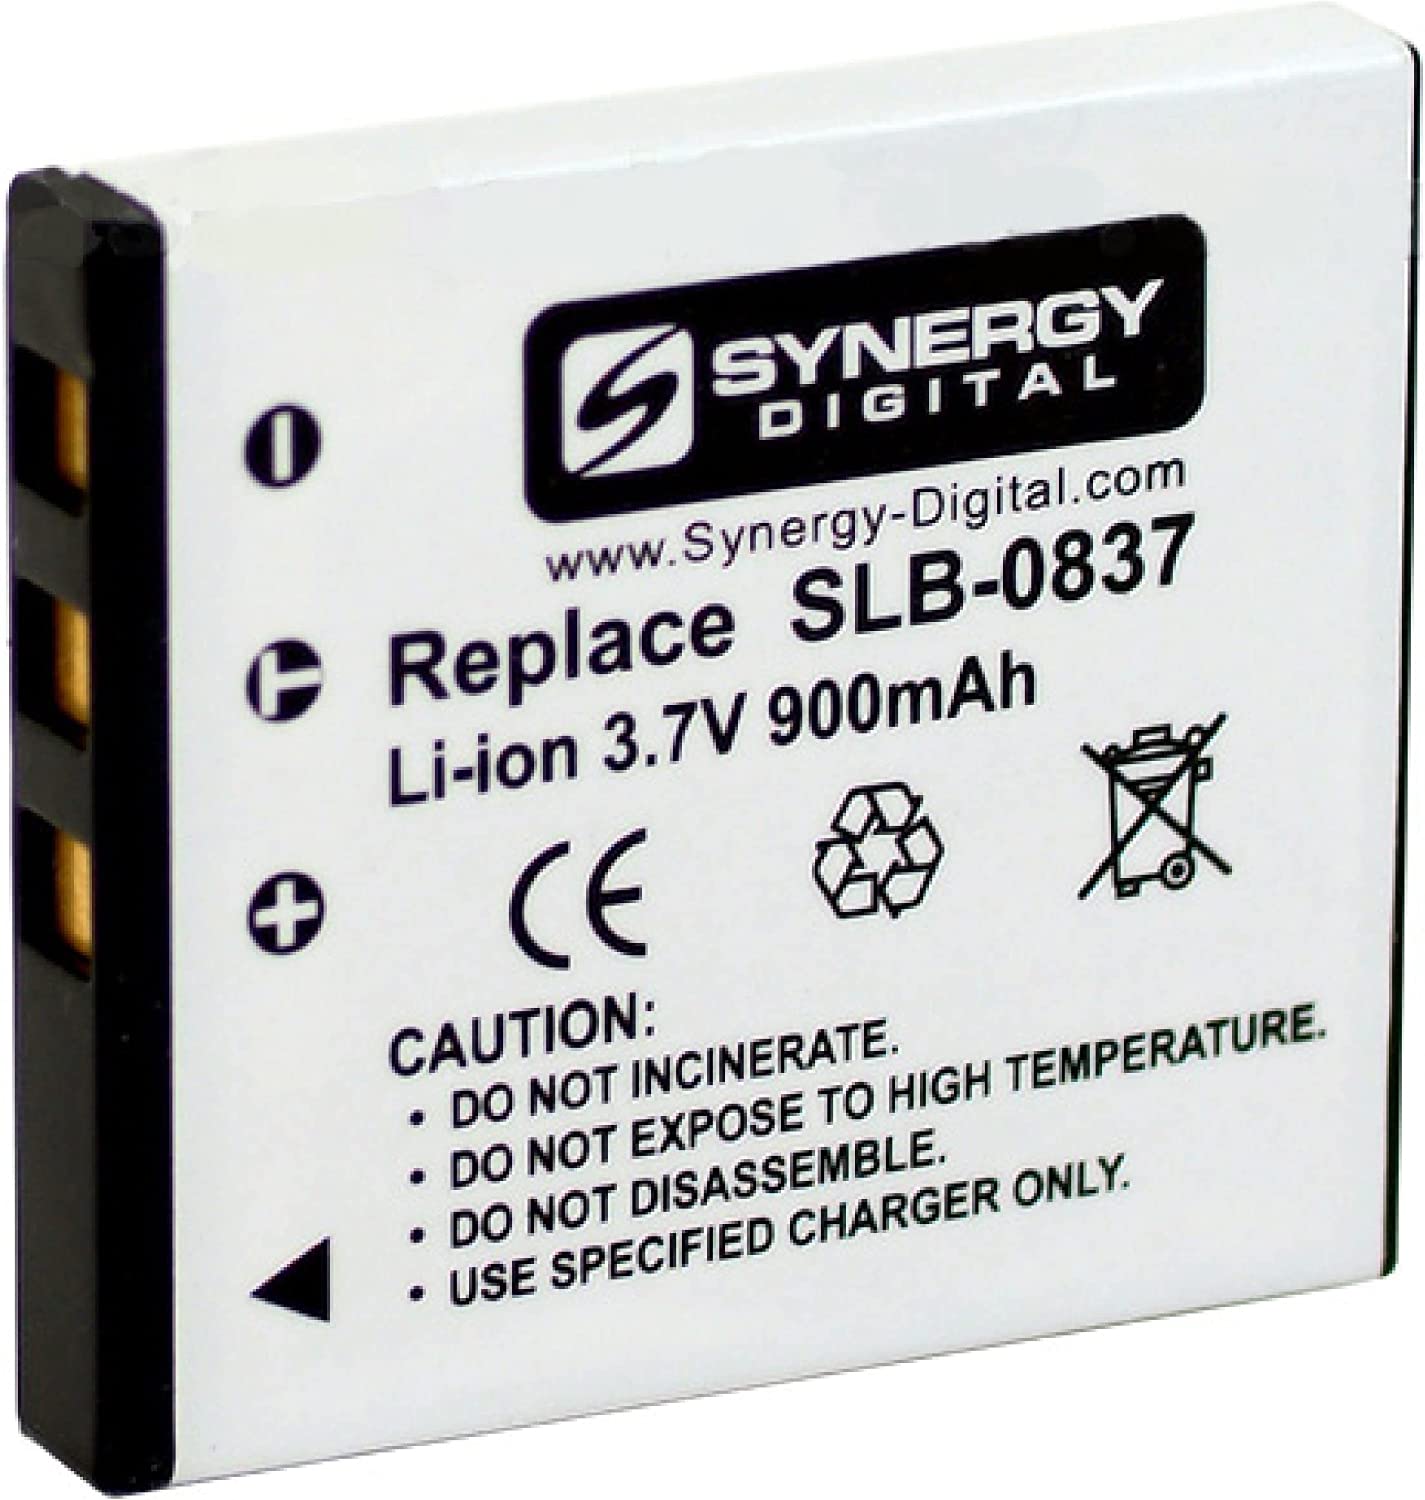 Samsung SLB-0837 Battery Replacement - Battery World